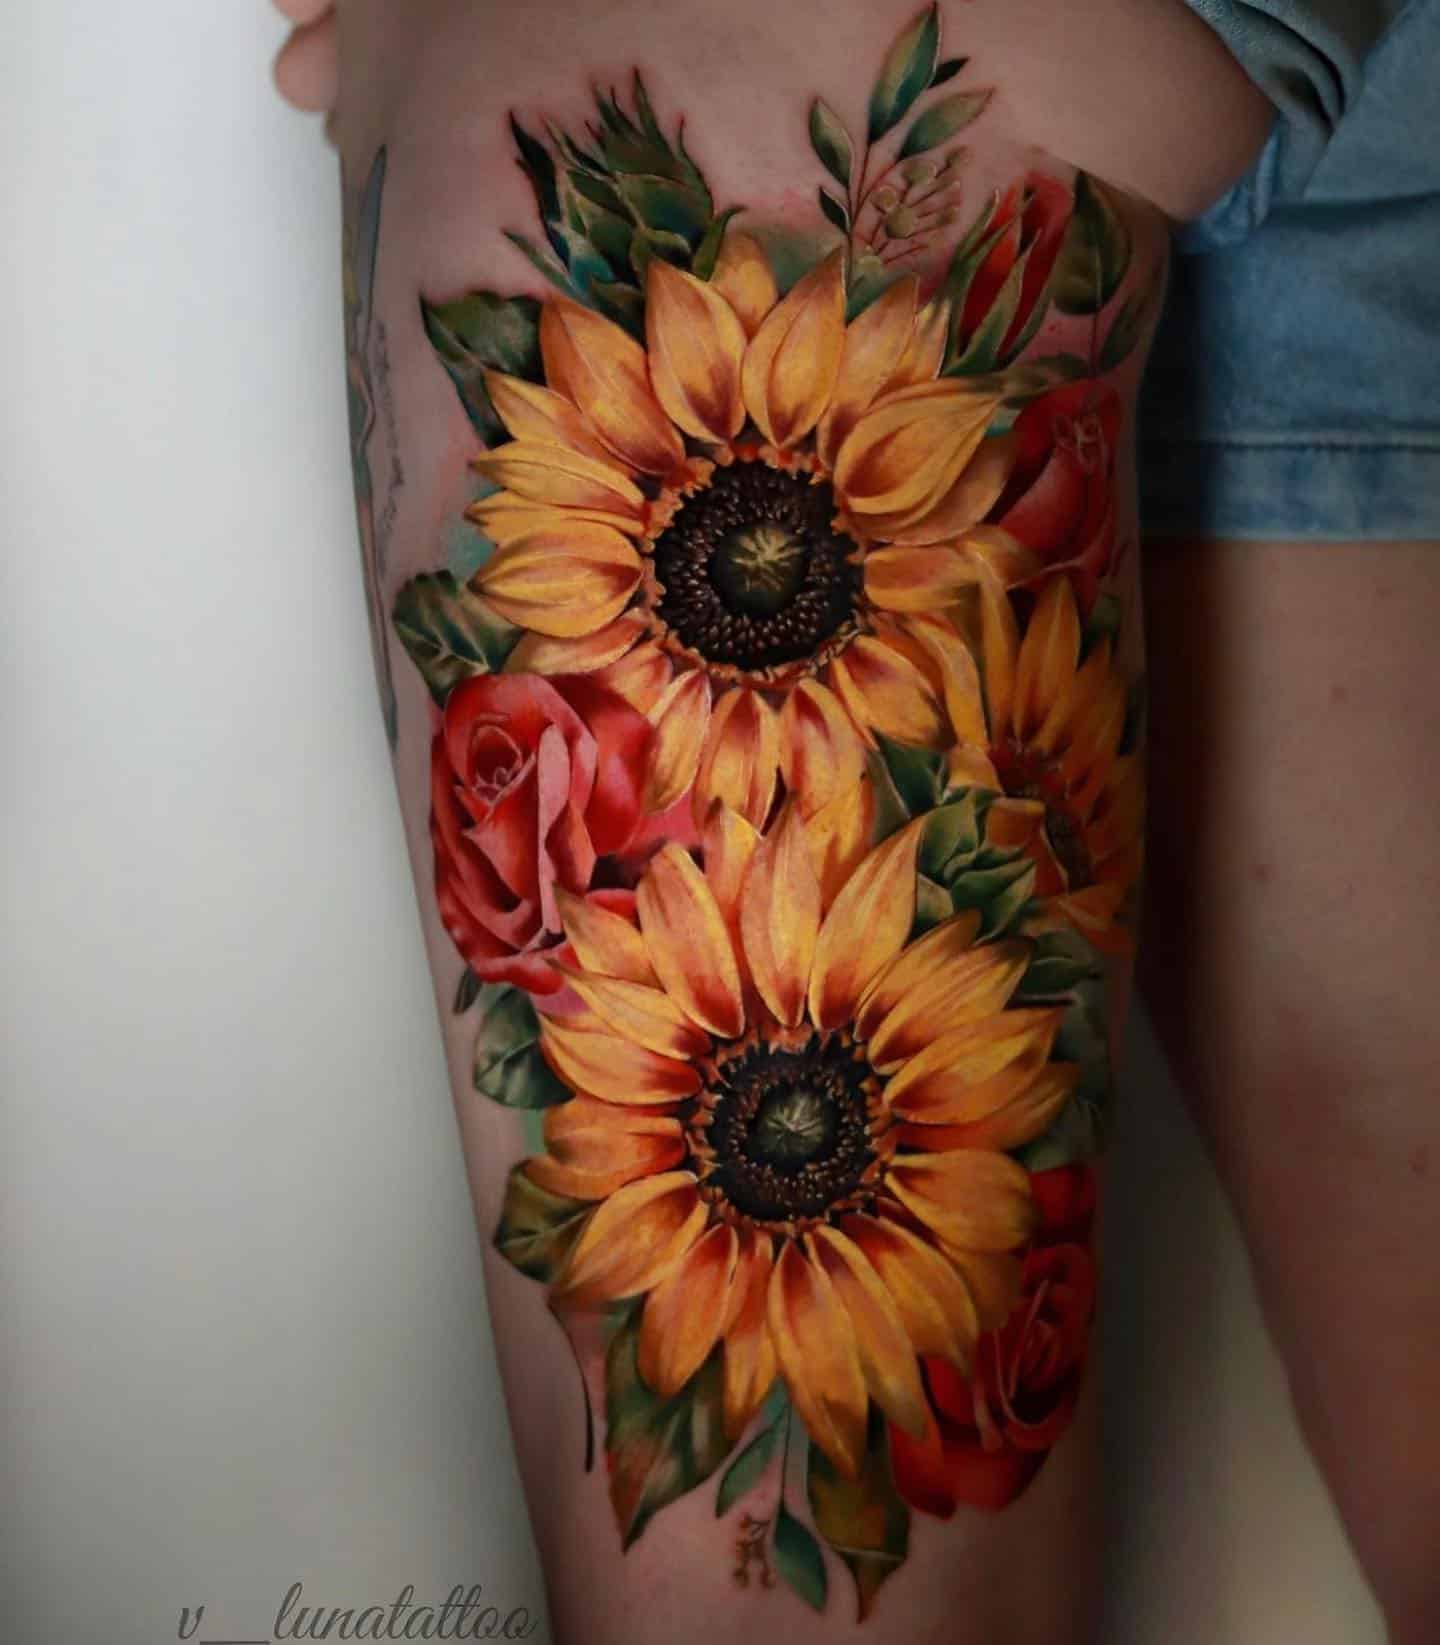 Massive sunflower coverup project done last night in one session  Dela Ink  Tattoo Denver CO  Paul Berkey  rtattoo